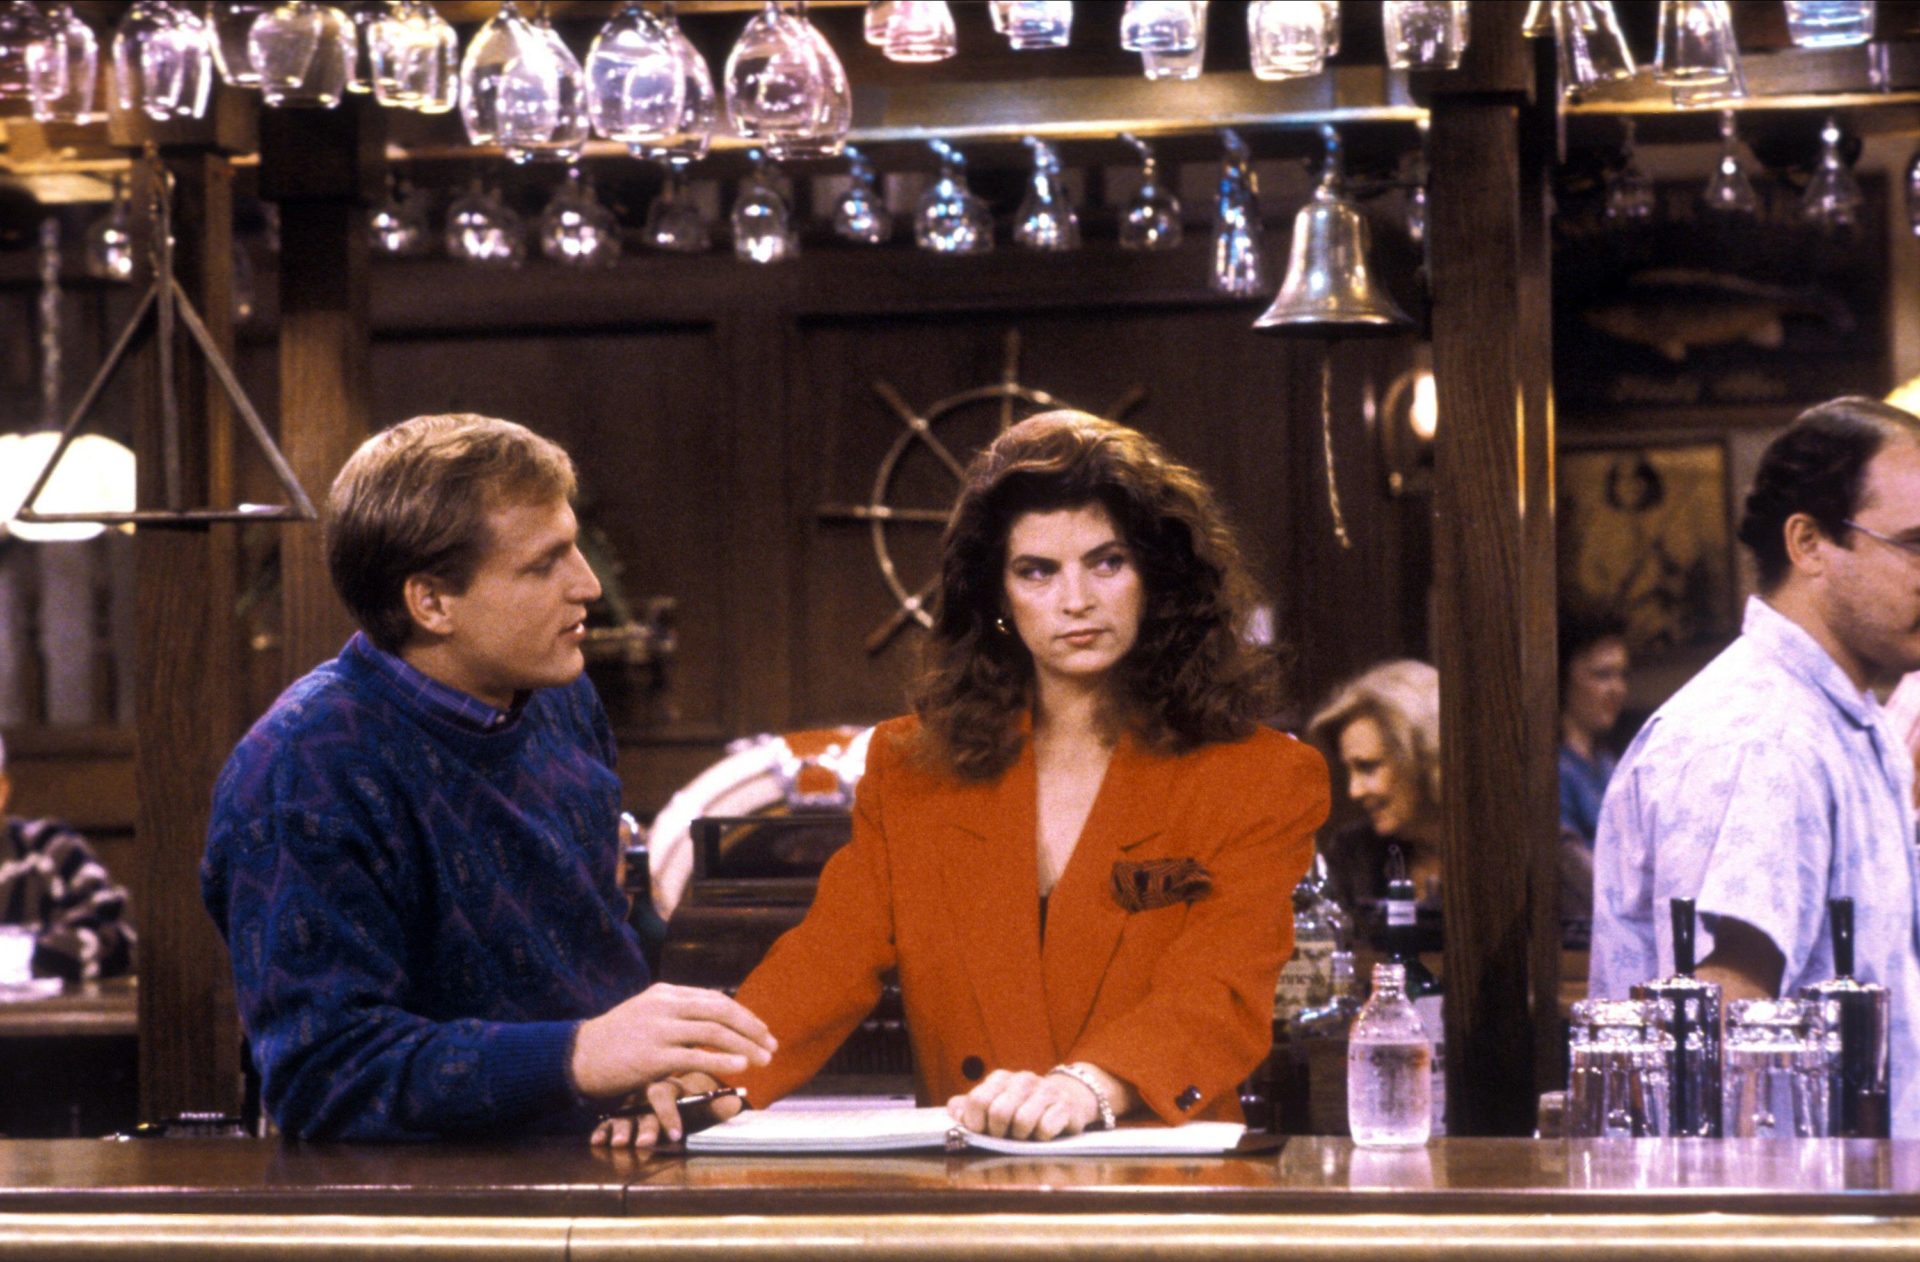 Kirstie Alley with Woody Harrelson in Cheers, 1982